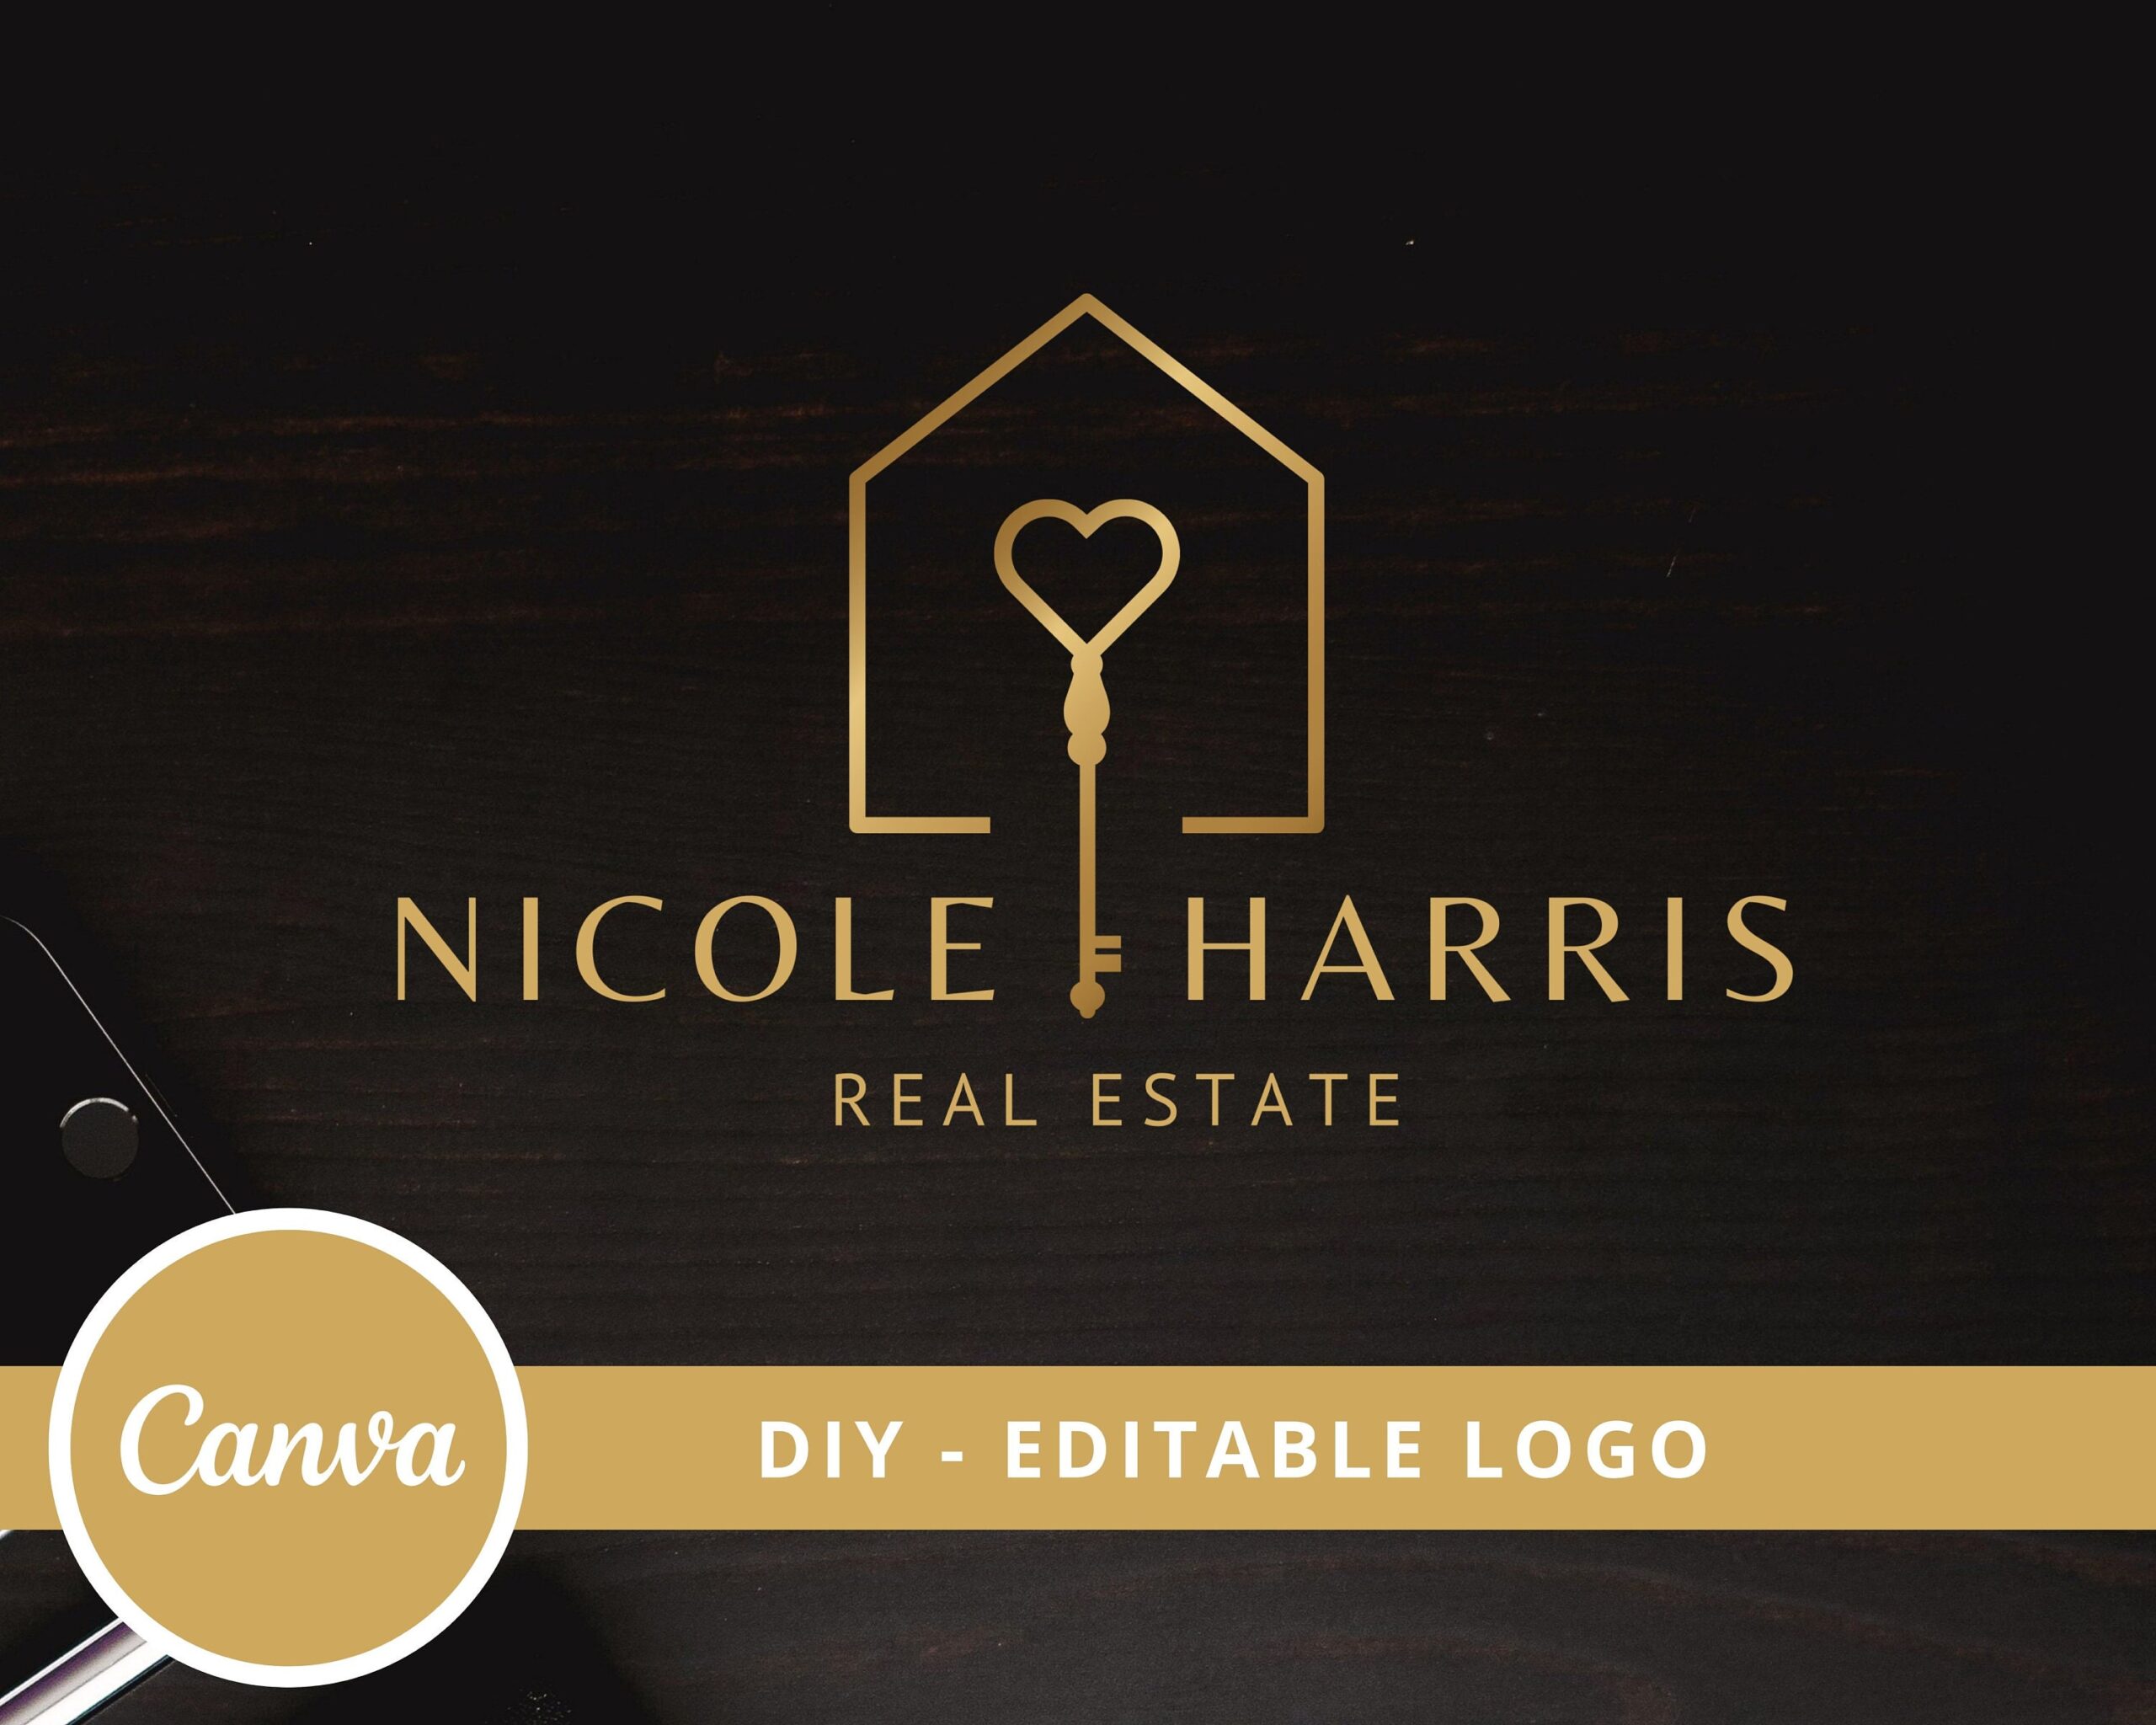 DIY Real Estate Logo Design, Fully Editable, Canva Template, Heart and Key Logo, Black Gold Designs, Real Estate Marketing, Instant Access